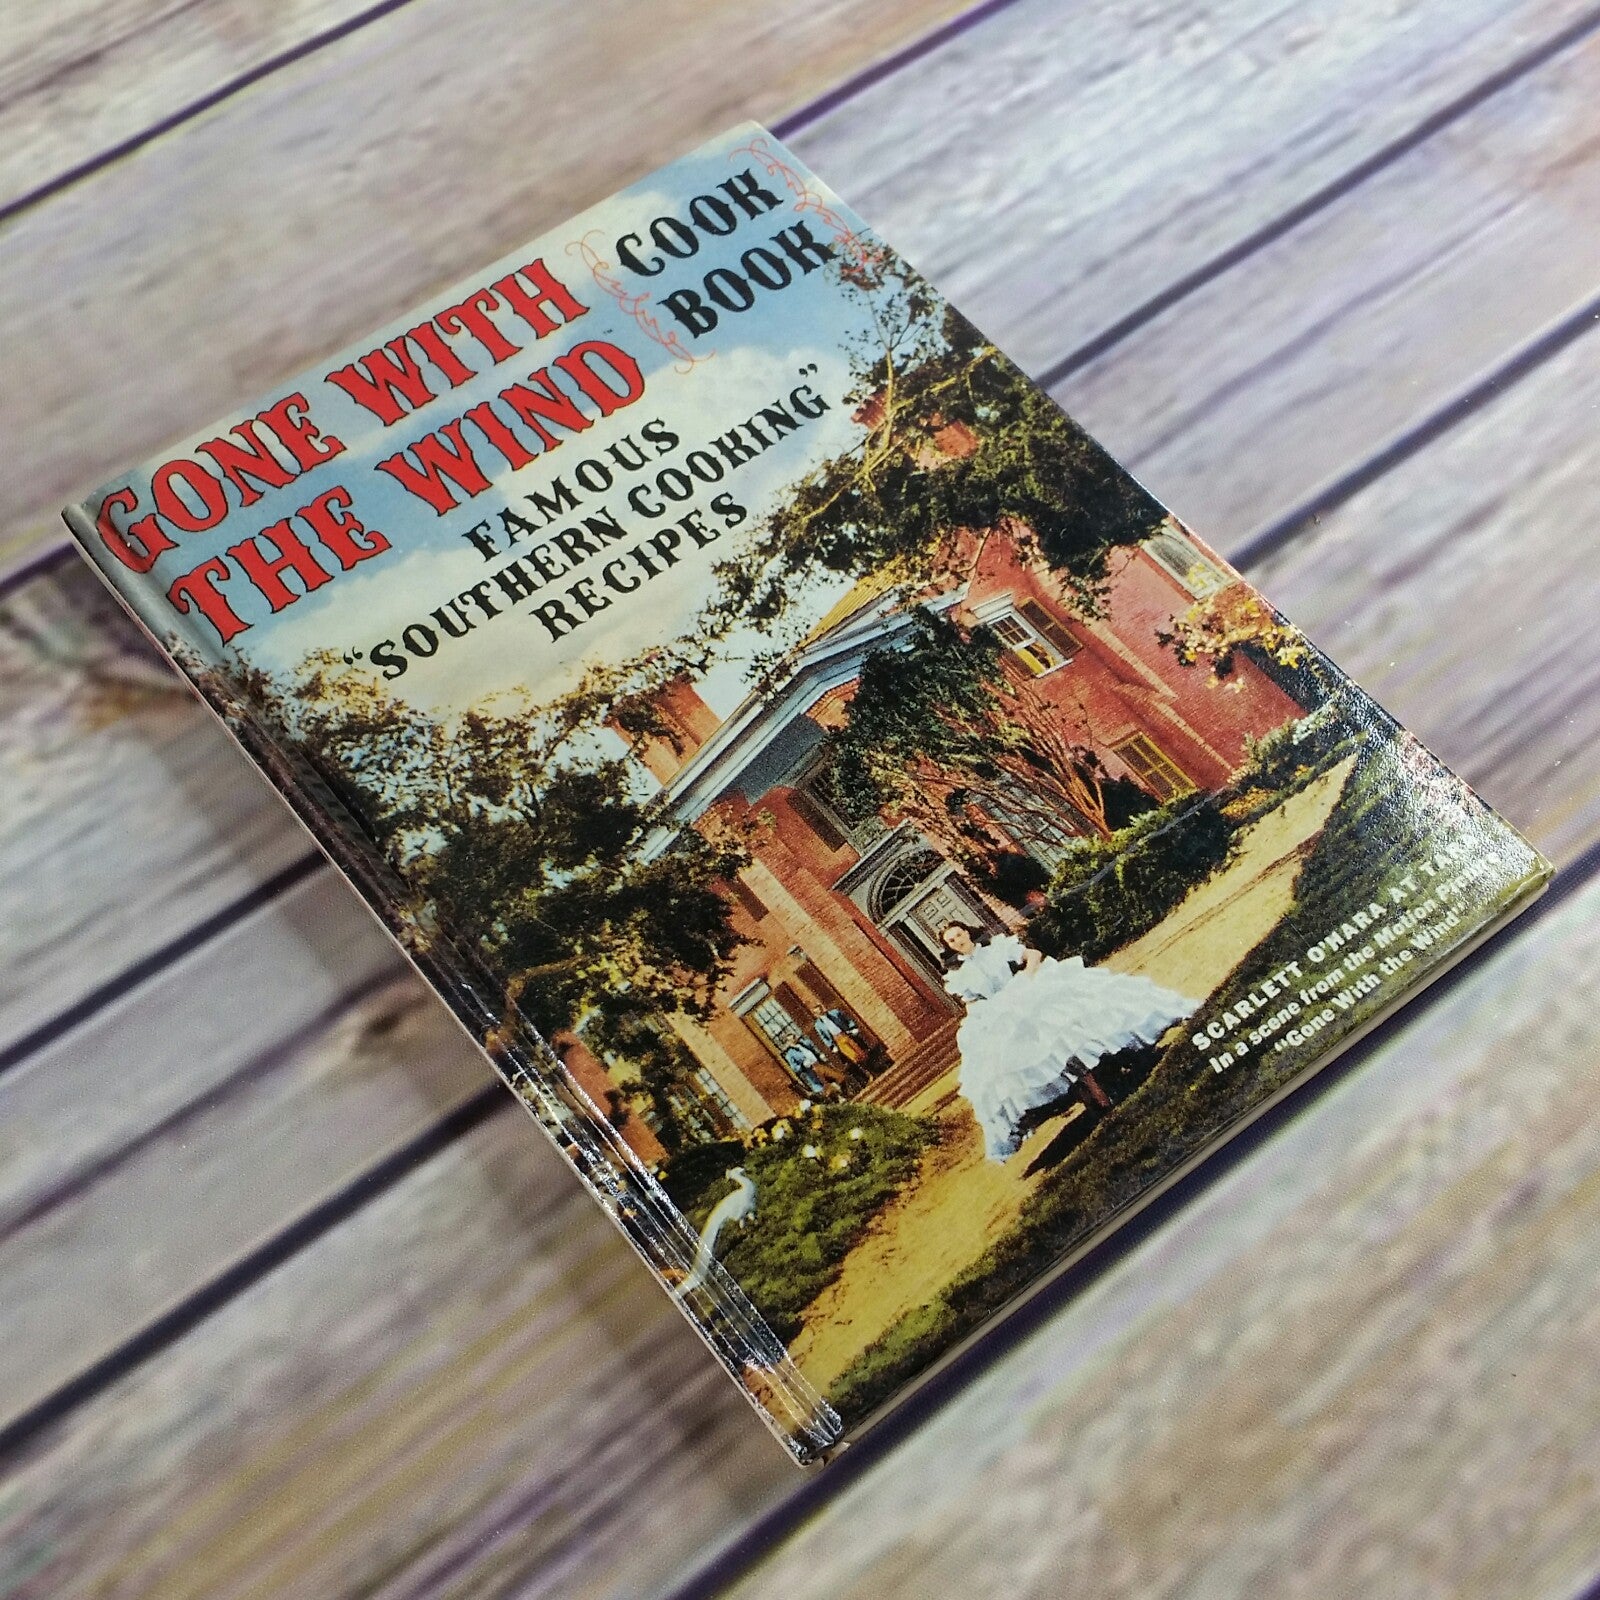 Vintage Cookbook Gone With The Wind Cook Book Hardcover 1991 Famous Southern Cooking Recipes - At Grandma's Table